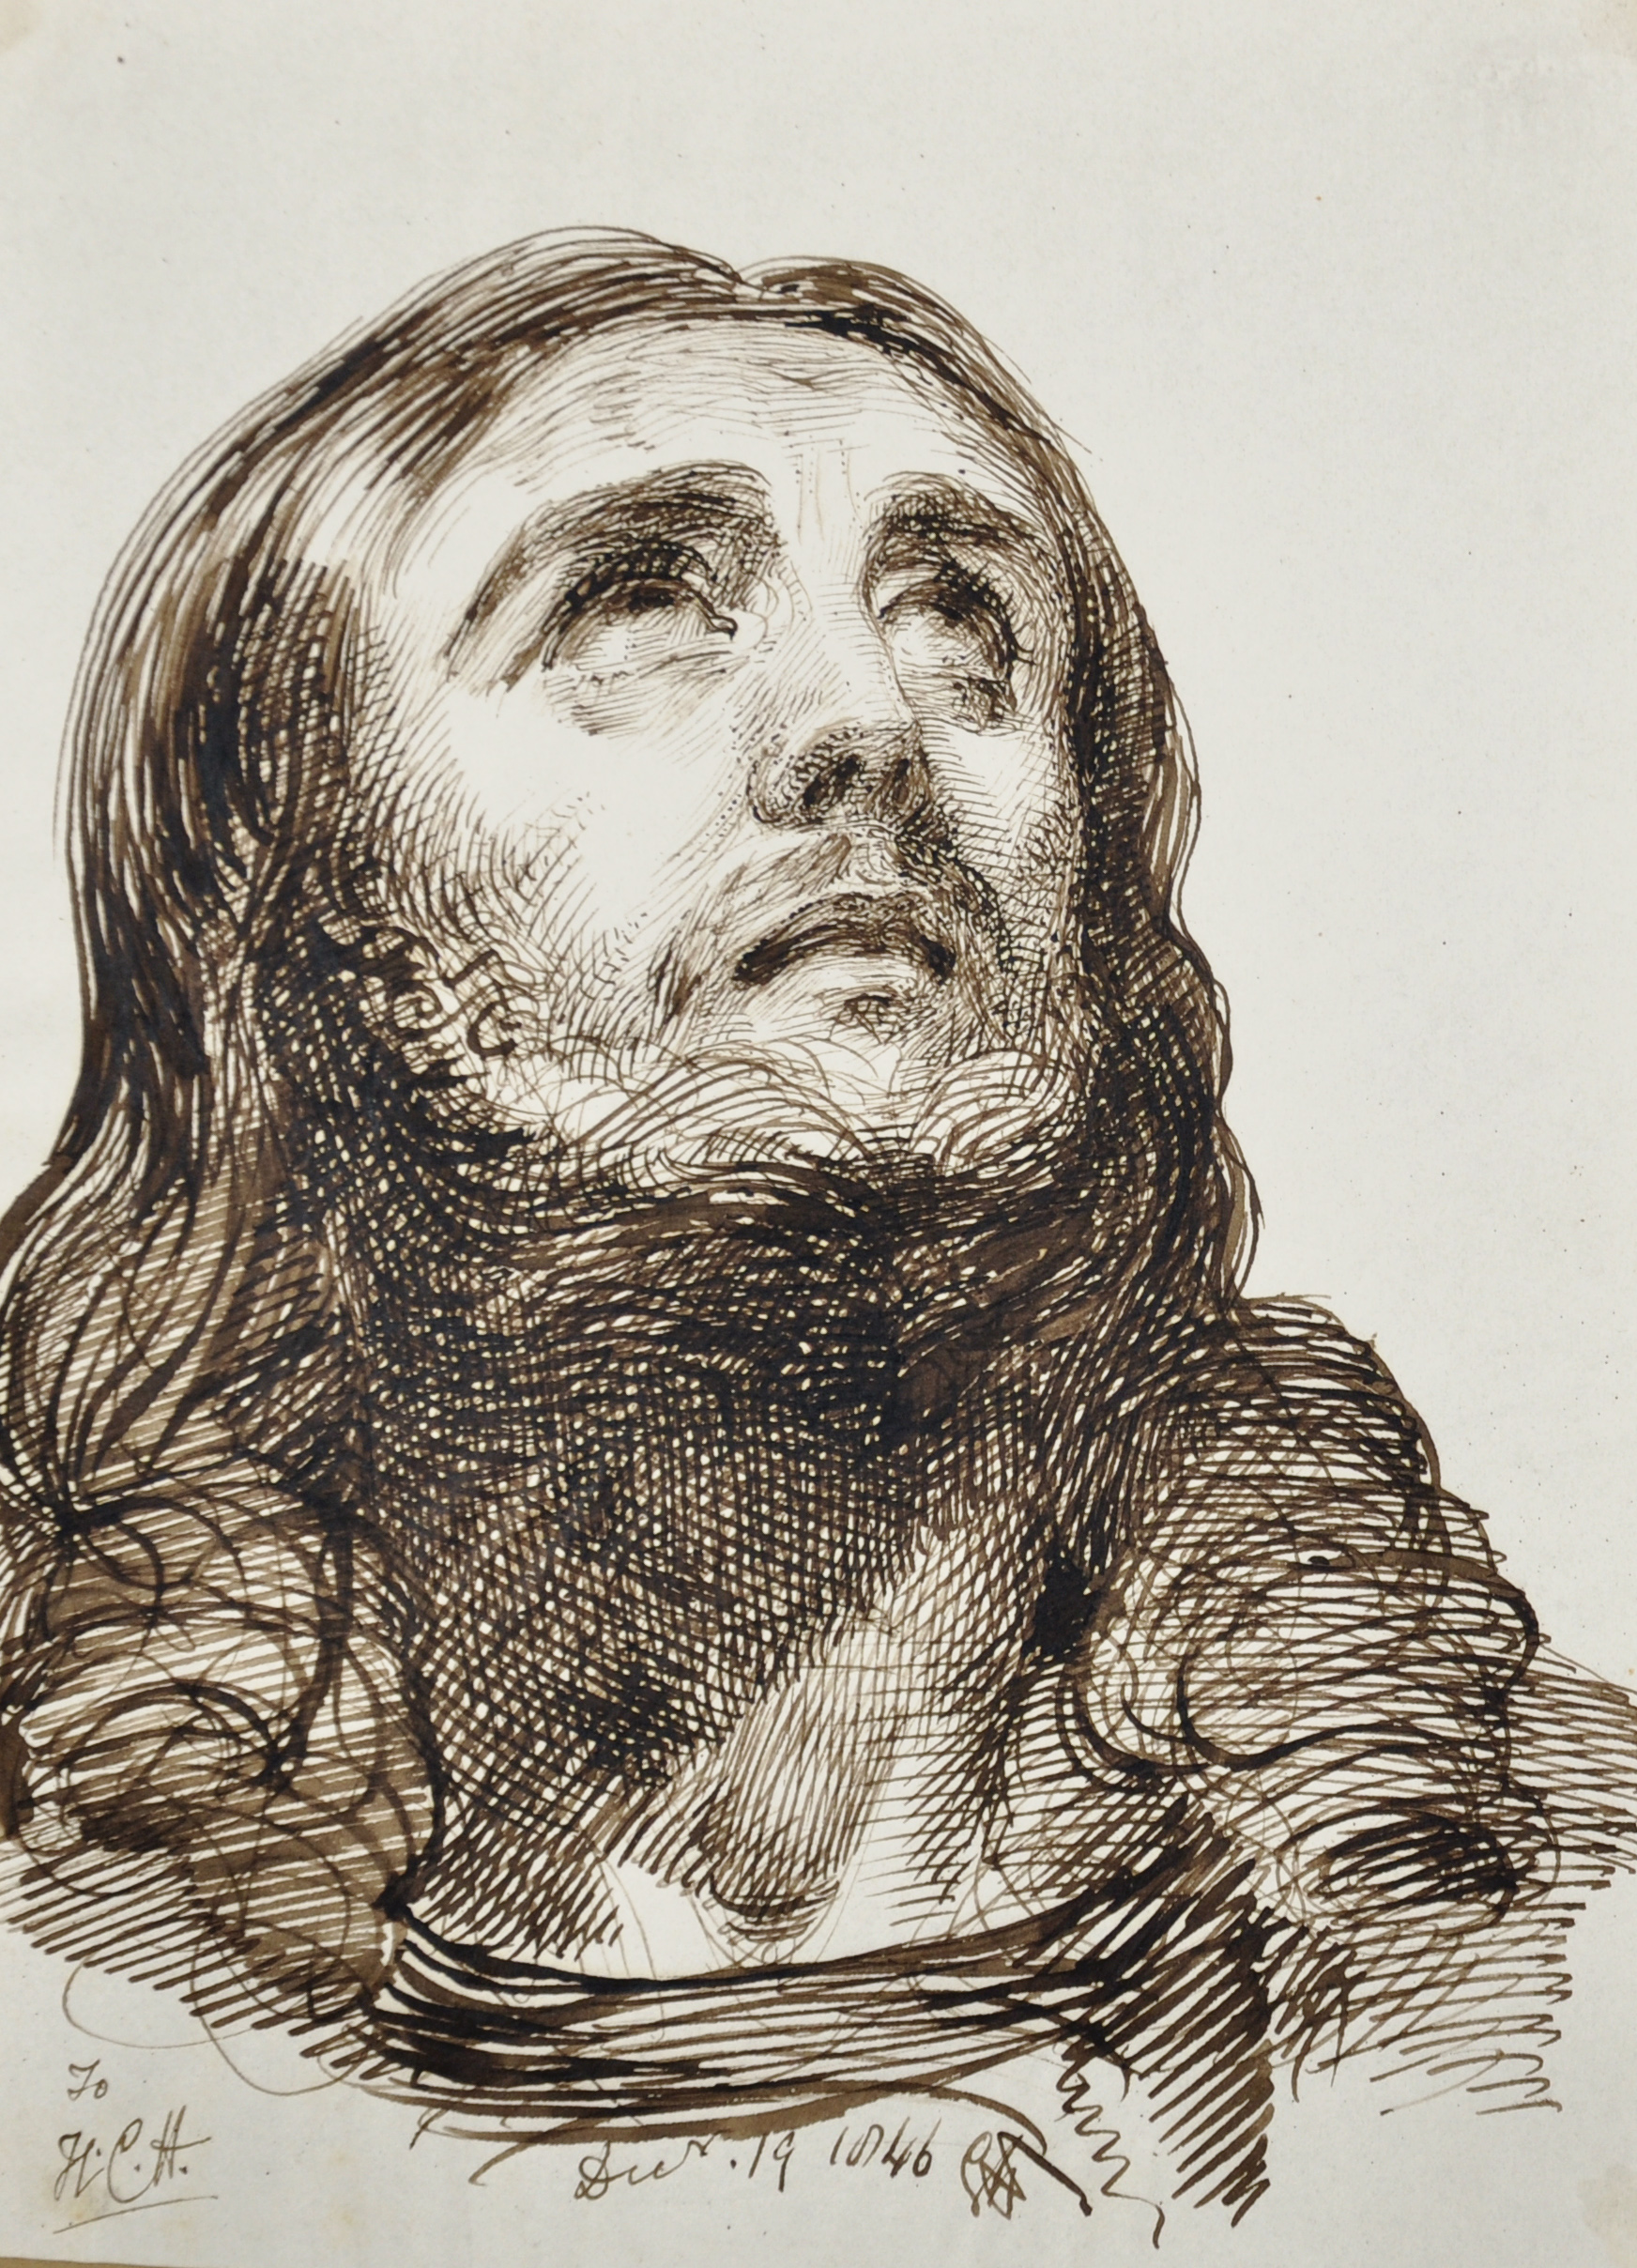 George Hayter (1792-1871) British. Study of the Head of Christ, Ink, Inscribed 'To LCH' and Dated '